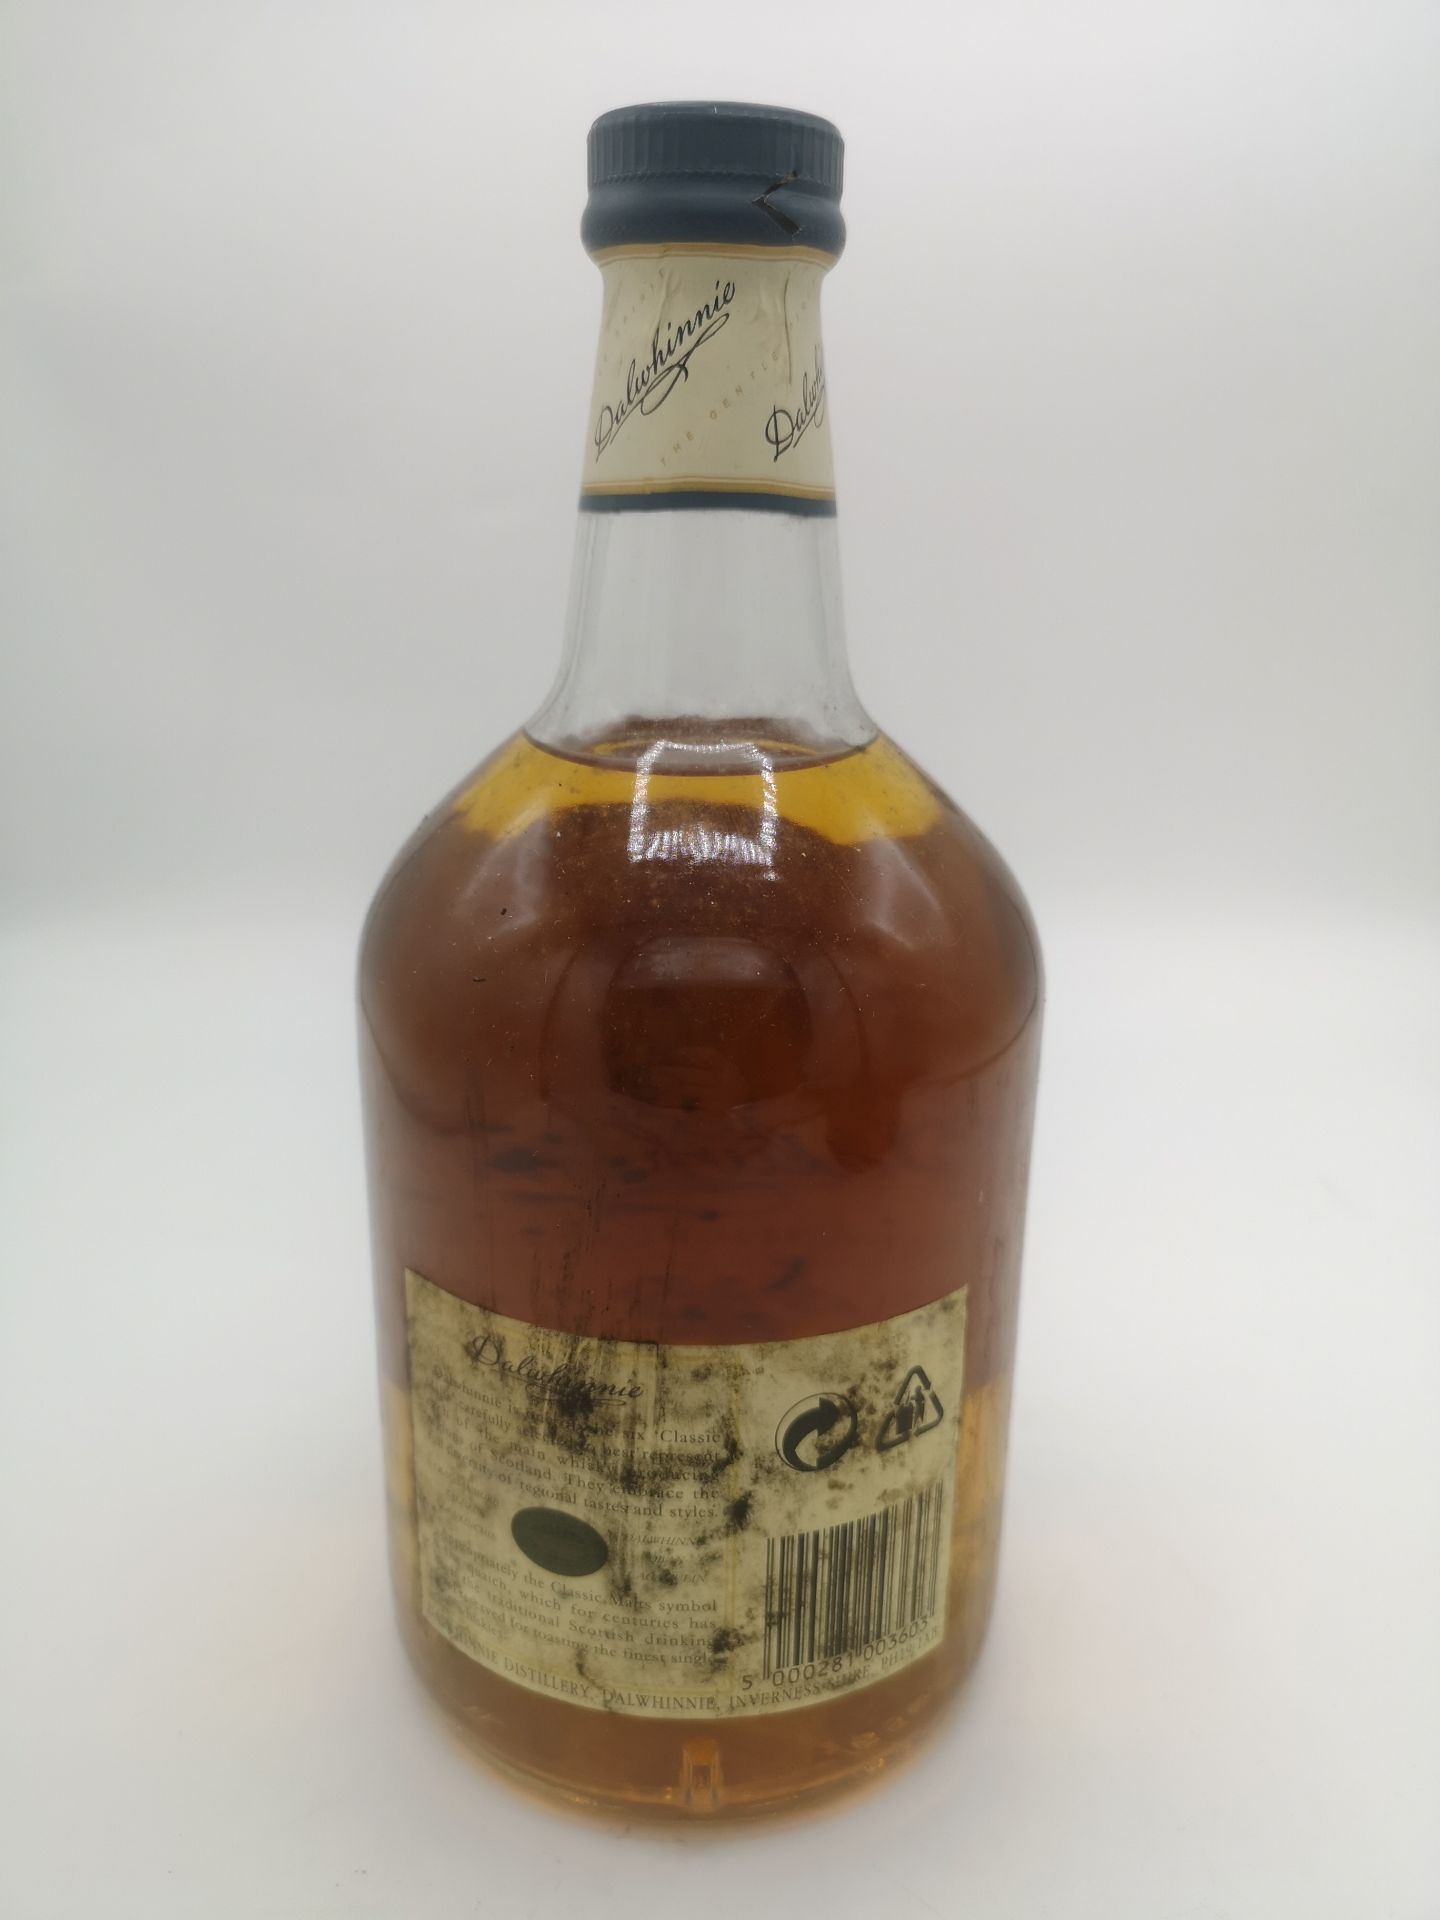 1l bottle of Dalwhinnie Scotch whisky - Image 2 of 8